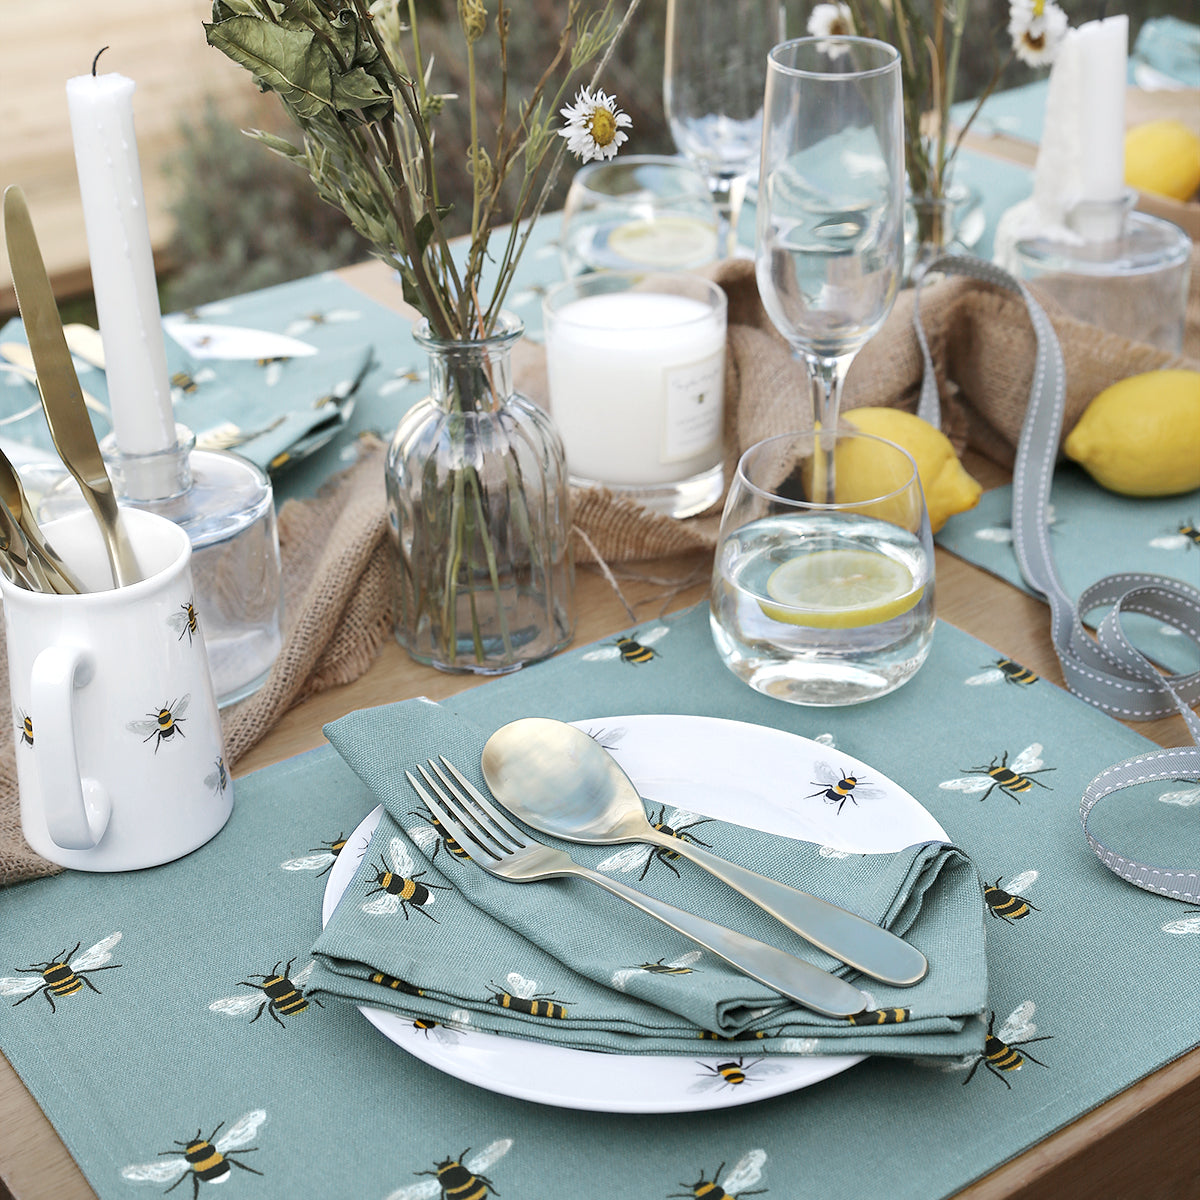 Bees teal fabric napkins made from 100% cotton by Sophie Allport